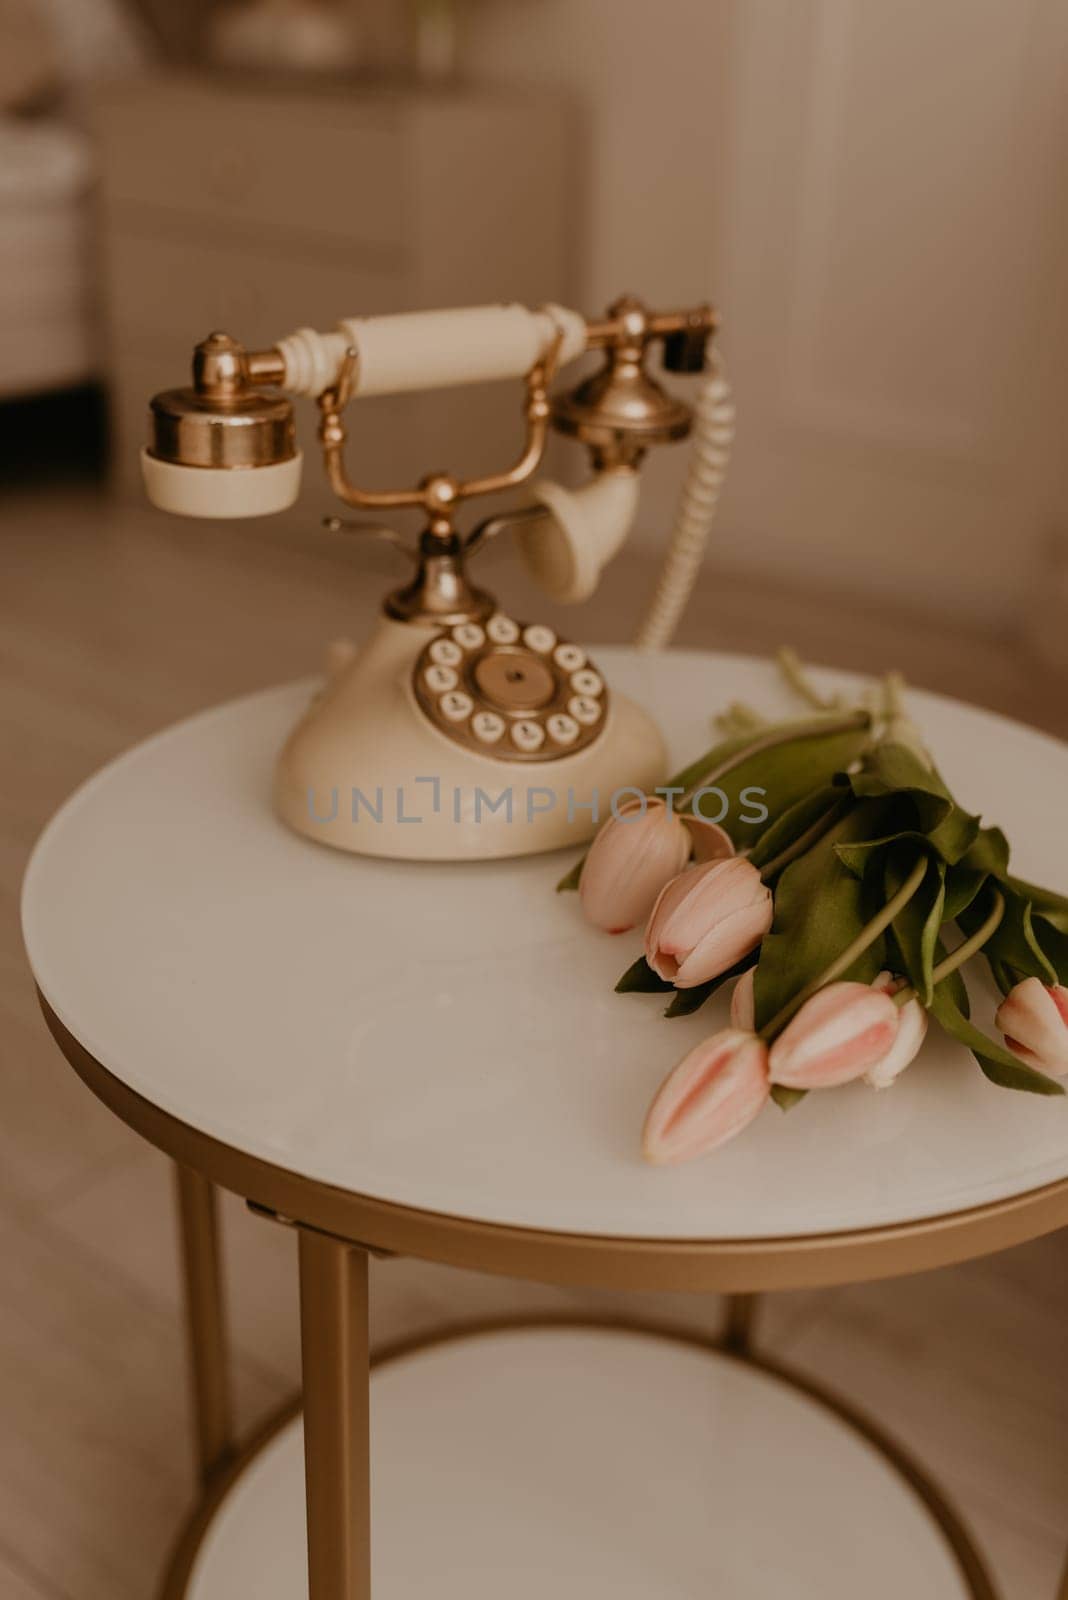 rare phone exquisite vintage decorated with gold fresh pastel flowers tulips. furniture, design solutions. details in interior decoration for home.holiday March 8, International Women Day, gift